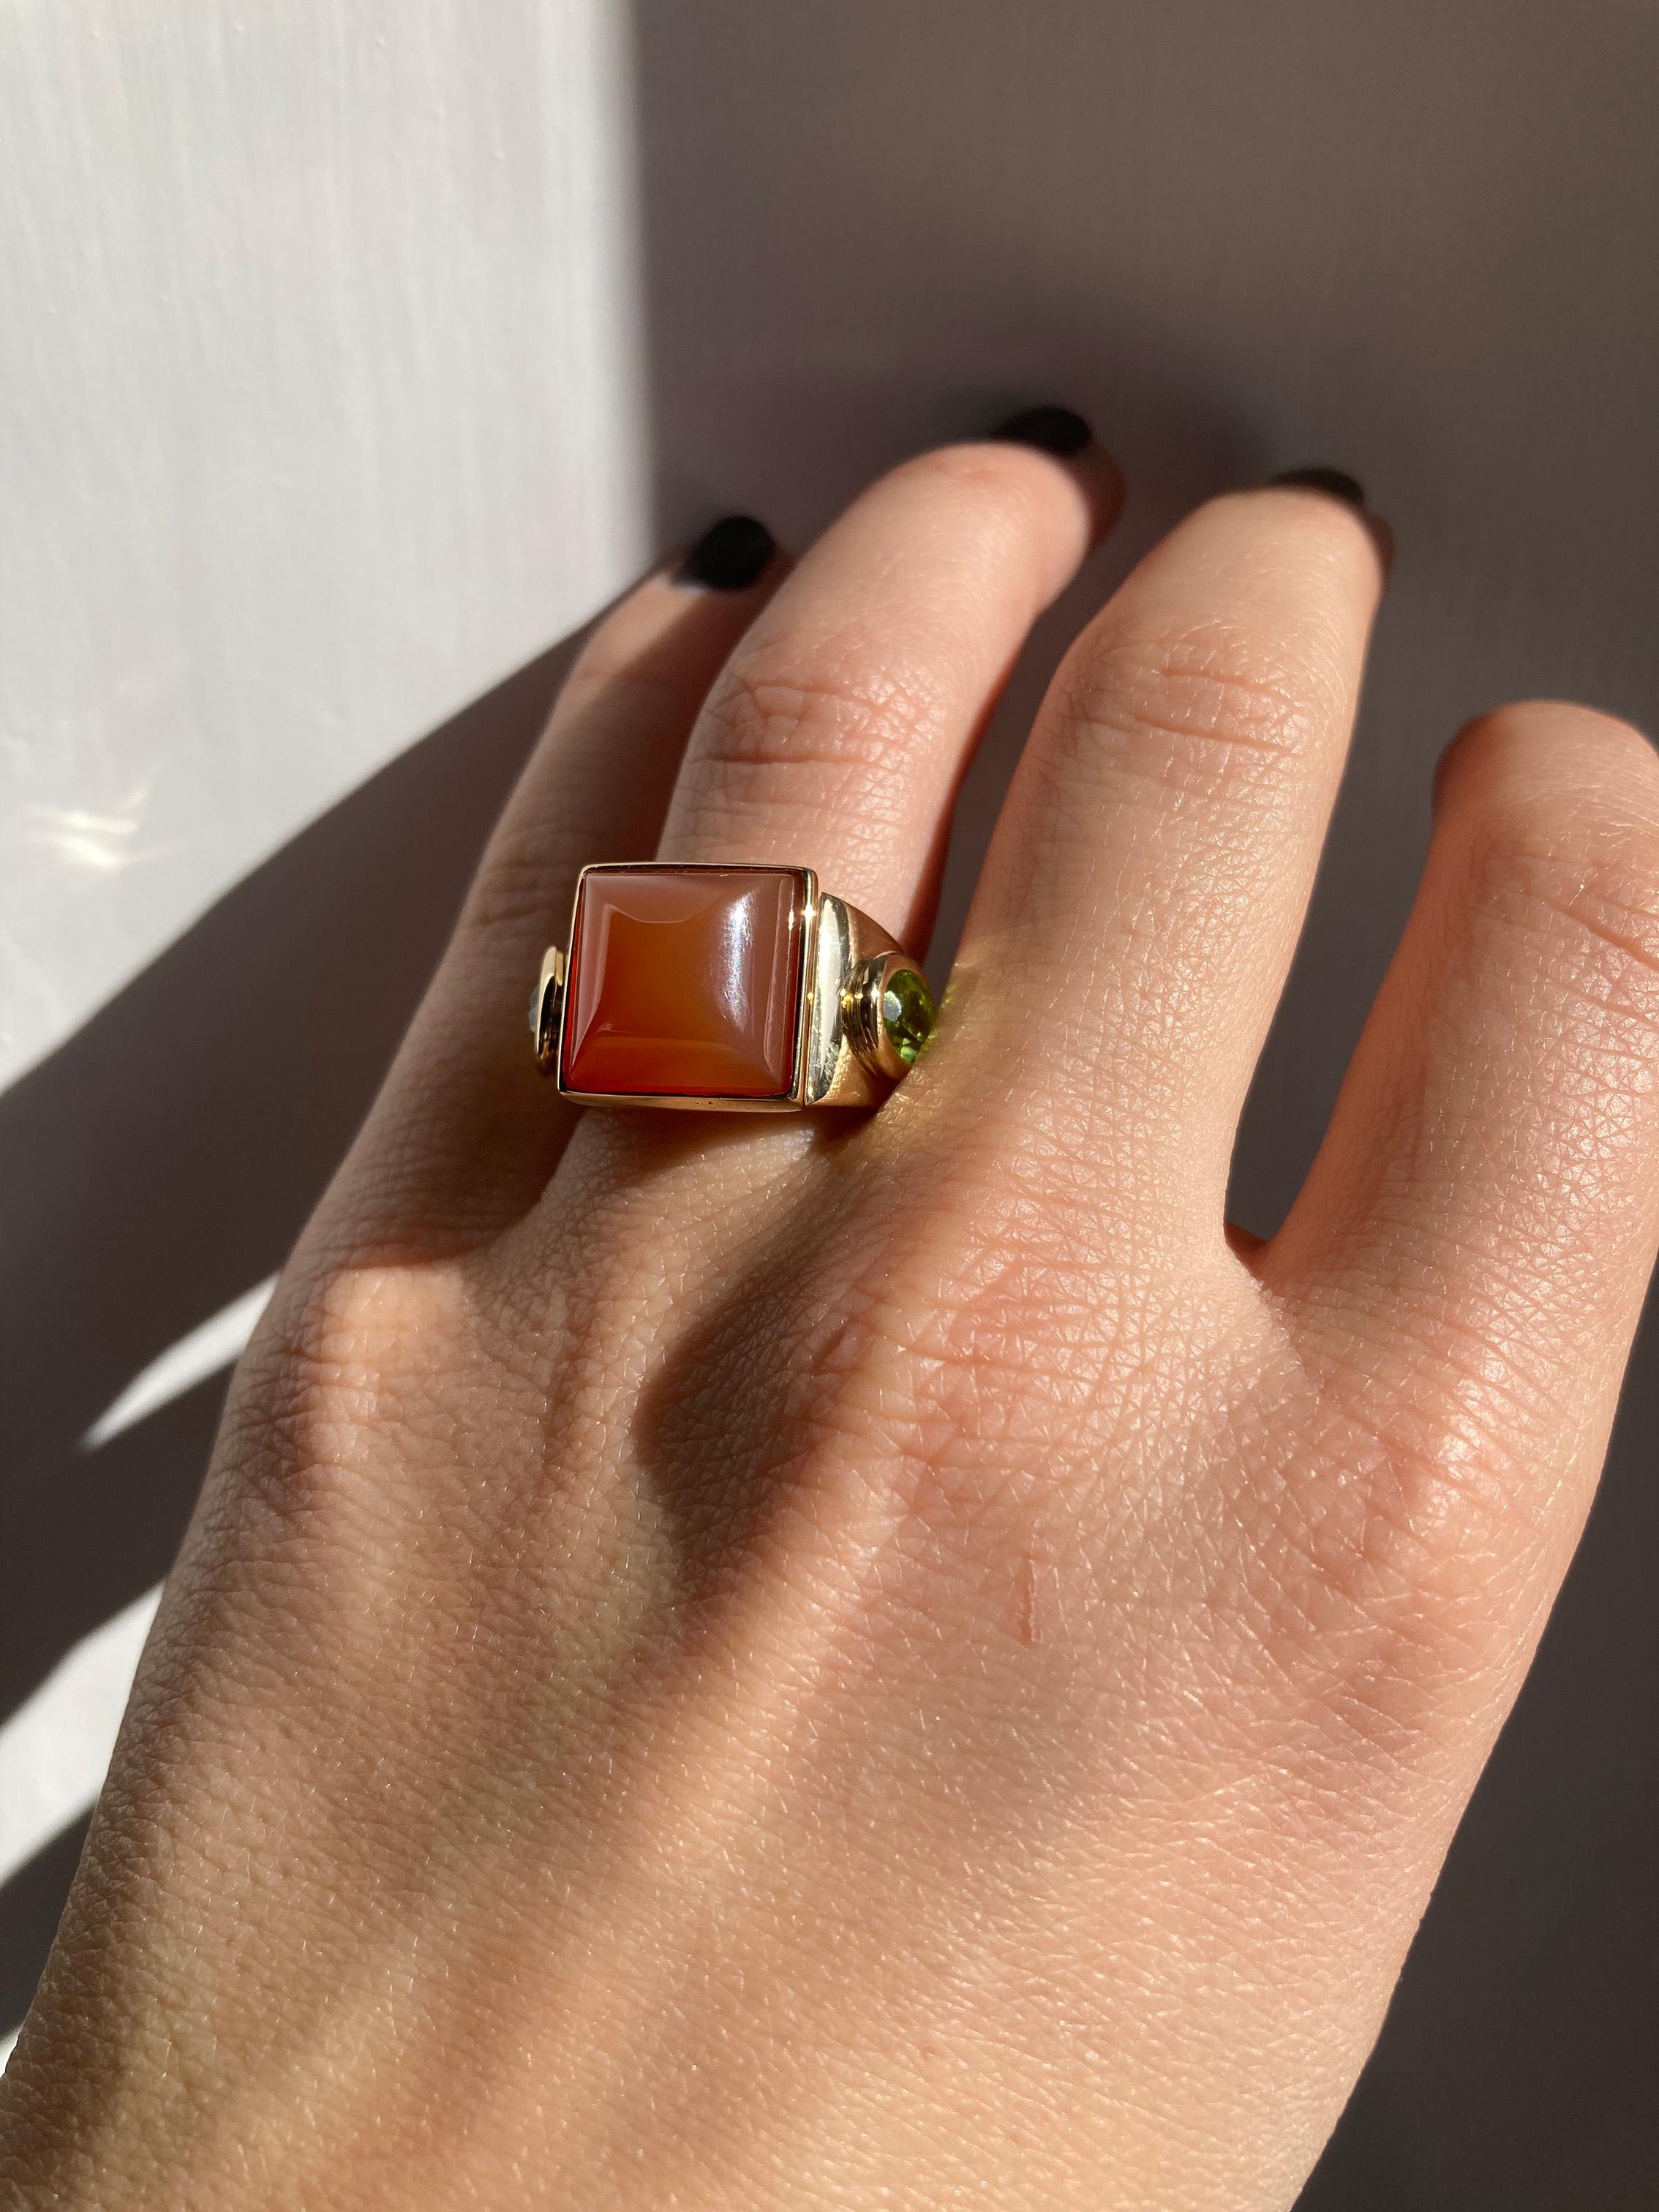 Rossella Ugolini Castle Collection 18 Karat Yellow Gold Orange Carnelian oval Peridot Unique Design Ring, 
Available in any size upon order within three weeks. 

Handcrafted in luxurious 18 karat Yellow Gold, this ring features a captivating